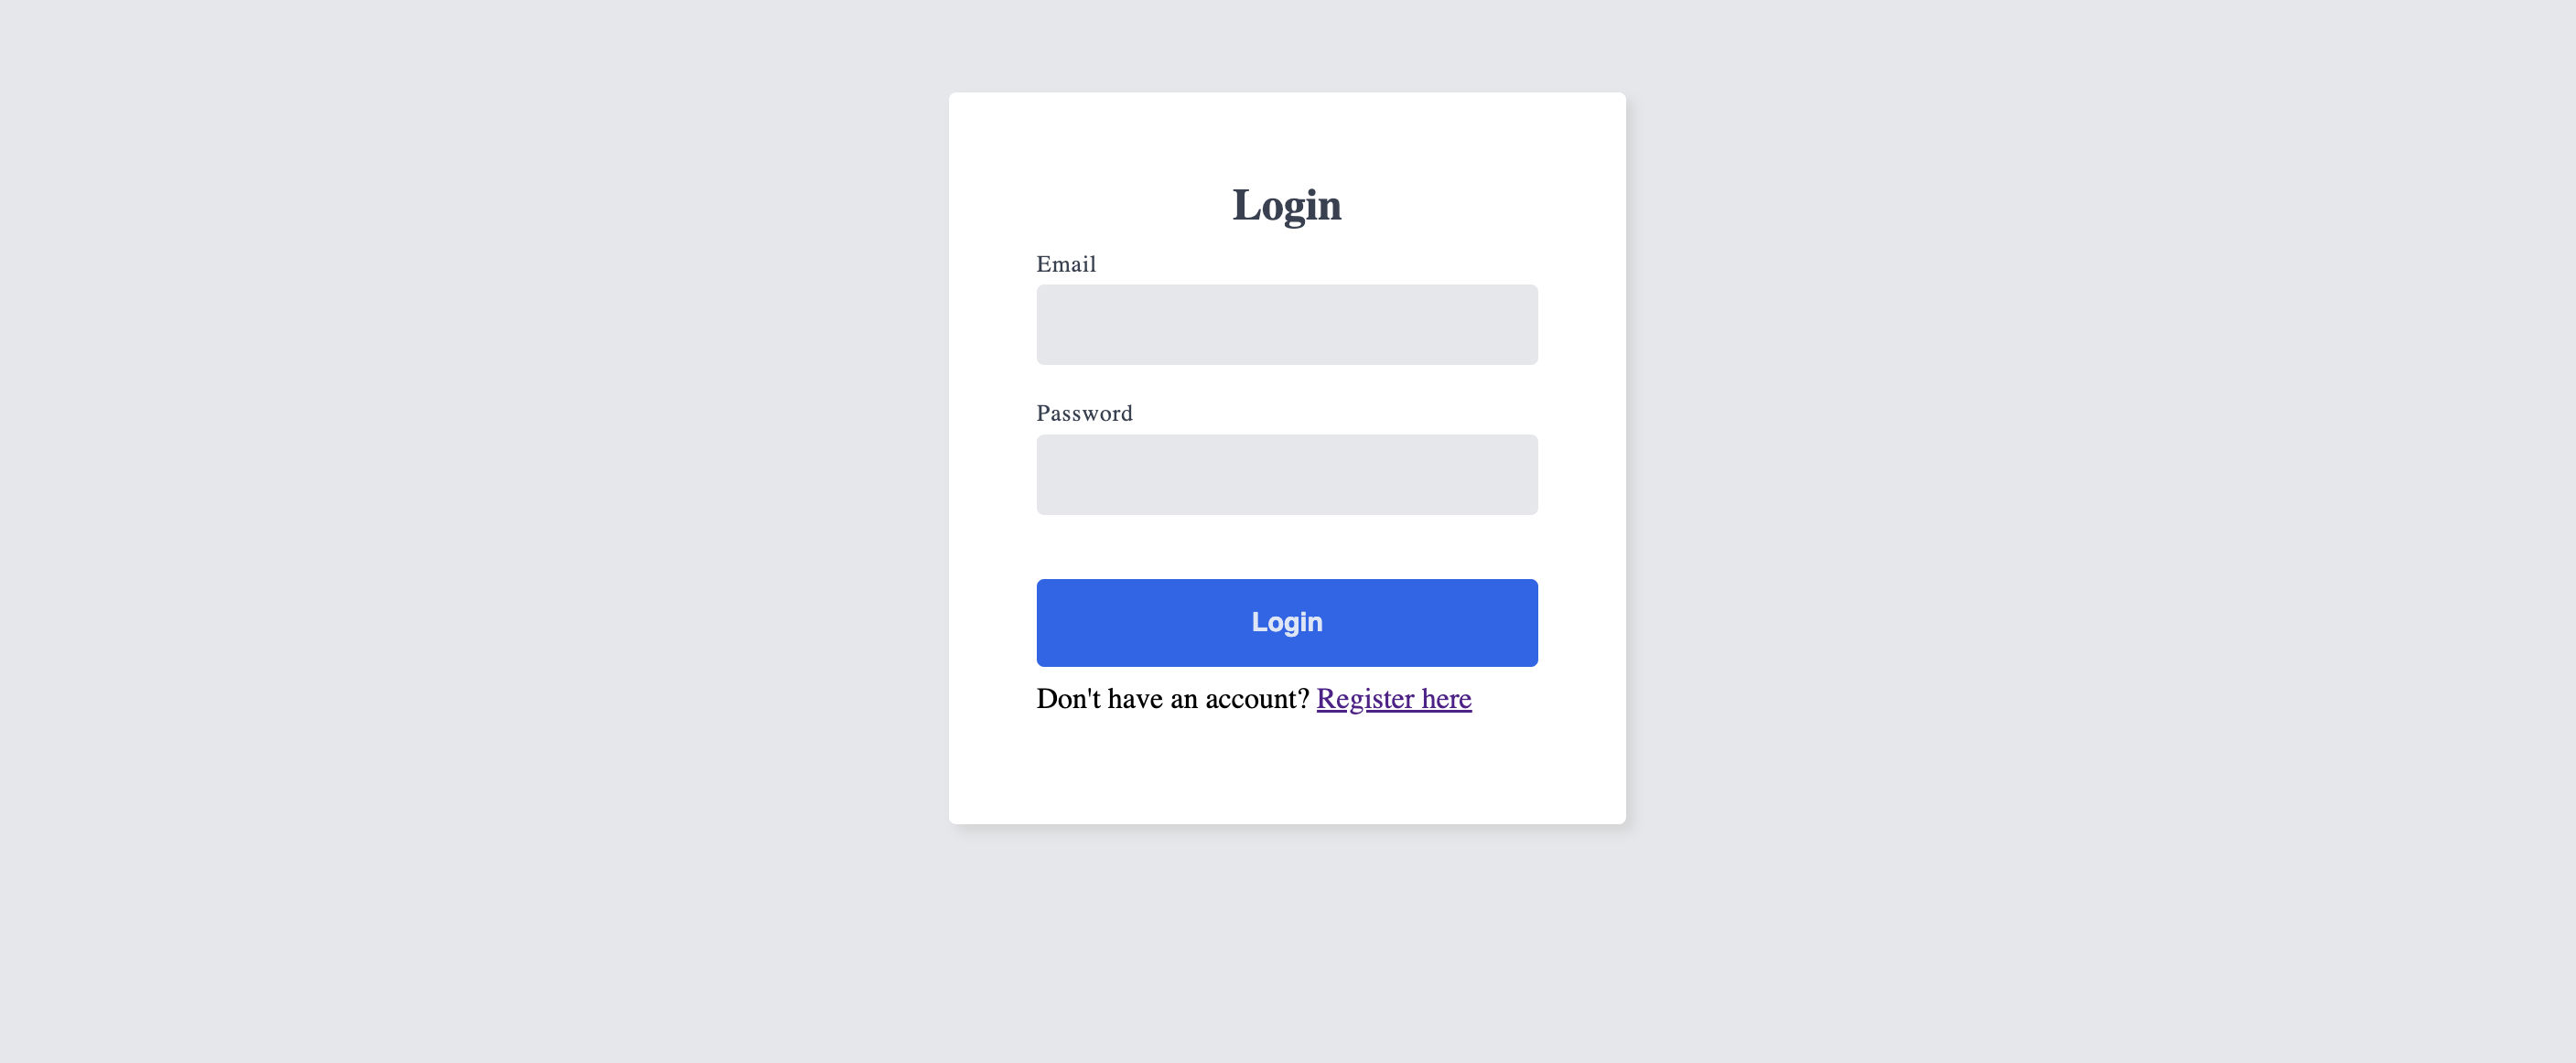 A Login page showing page title, inputs and login button